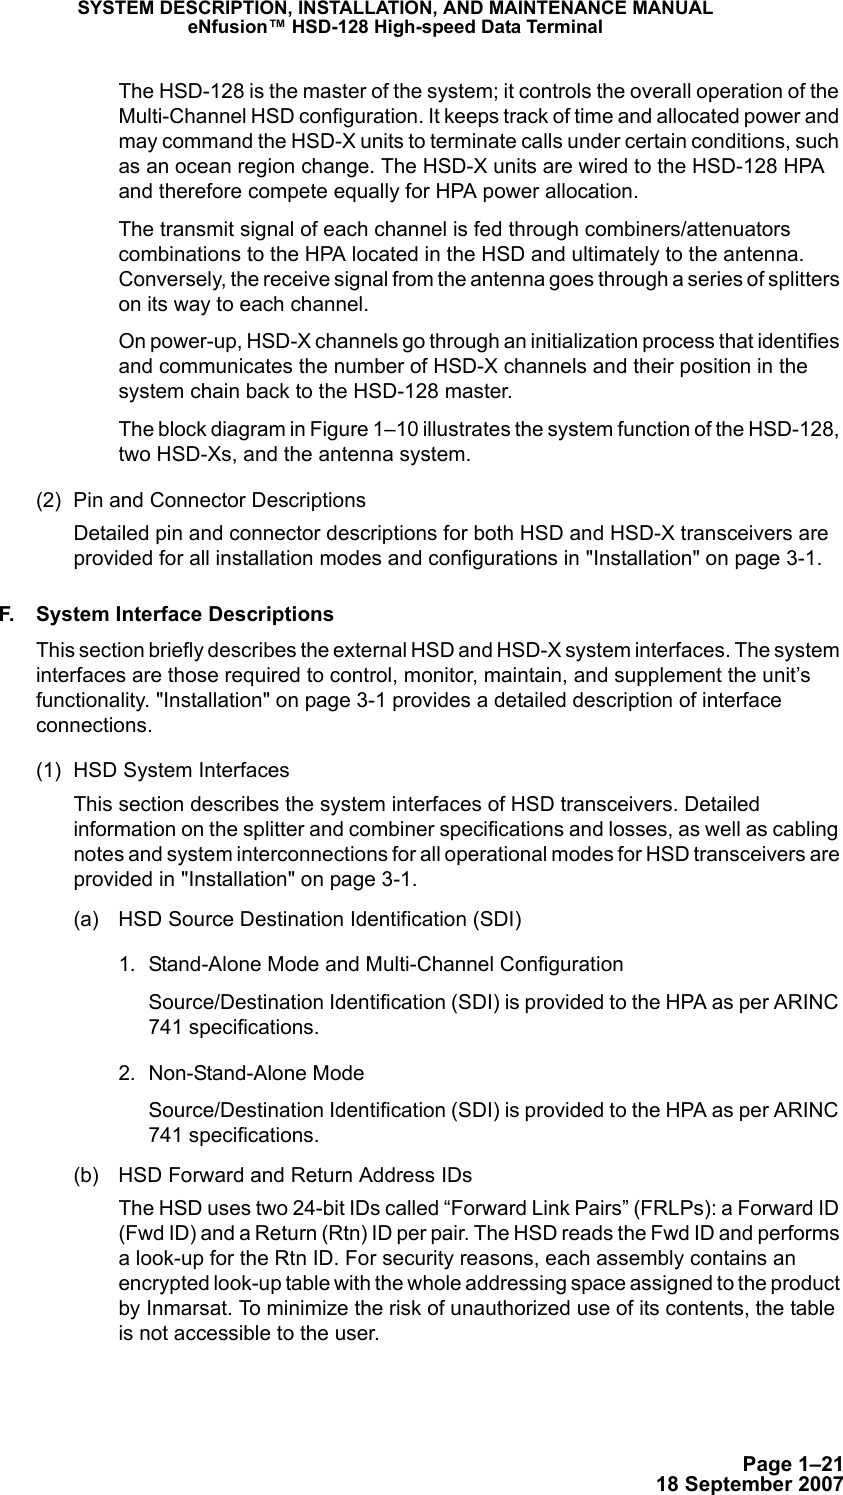 Page 1–2118 September 2007SYSTEM DESCRIPTION, INSTALLATION, AND MAINTENANCE MANUALeNfusion™ HSD-128 High-speed Data TerminalThe HSD-128 is the master of the system; it controls the overall operation of the Multi-Channel HSD configuration. It keeps track of time and allocated power and may command the HSD-X units to terminate calls under certain conditions, such as an ocean region change. The HSD-X units are wired to the HSD-128 HPA and therefore compete equally for HPA power allocation. The transmit signal of each channel is fed through combiners/attenuators combinations to the HPA located in the HSD and ultimately to the antenna. Conversely, the receive signal from the antenna goes through a series of splitters on its way to each channel.On power-up, HSD-X channels go through an initialization process that identifies and communicates the number of HSD-X channels and their position in the system chain back to the HSD-128 master.The block diagram in Figure 1–10 illustrates the system function of the HSD-128, two HSD-Xs, and the antenna system.(2) Pin and Connector DescriptionsDetailed pin and connector descriptions for both HSD and HSD-X transceivers are provided for all installation modes and configurations in &quot;Installation&quot; on page 3-1. F. System Interface DescriptionsThis section briefly describes the external HSD and HSD-X system interfaces. The system interfaces are those required to control, monitor, maintain, and supplement the unit’s functionality. &quot;Installation&quot; on page 3-1 provides a detailed description of interface connections. (1) HSD System InterfacesThis section describes the system interfaces of HSD transceivers. Detailed information on the splitter and combiner specifications and losses, as well as cabling notes and system interconnections for all operational modes for HSD transceivers are provided in &quot;Installation&quot; on page 3-1.(a) HSD Source Destination Identification (SDI)1. Stand-Alone Mode and Multi-Channel ConfigurationSource/Destination Identification (SDI) is provided to the HPA as per ARINC 741 specifications.2. Non-Stand-Alone ModeSource/Destination Identification (SDI) is provided to the HPA as per ARINC 741 specifications.(b) HSD Forward and Return Address IDsThe HSD uses two 24-bit IDs called “Forward Link Pairs” (FRLPs): a Forward ID (Fwd ID) and a Return (Rtn) ID per pair. The HSD reads the Fwd ID and performs a look-up for the Rtn ID. For security reasons, each assembly contains an encrypted look-up table with the whole addressing space assigned to the product by Inmarsat. To minimize the risk of unauthorized use of its contents, the table is not accessible to the user. 